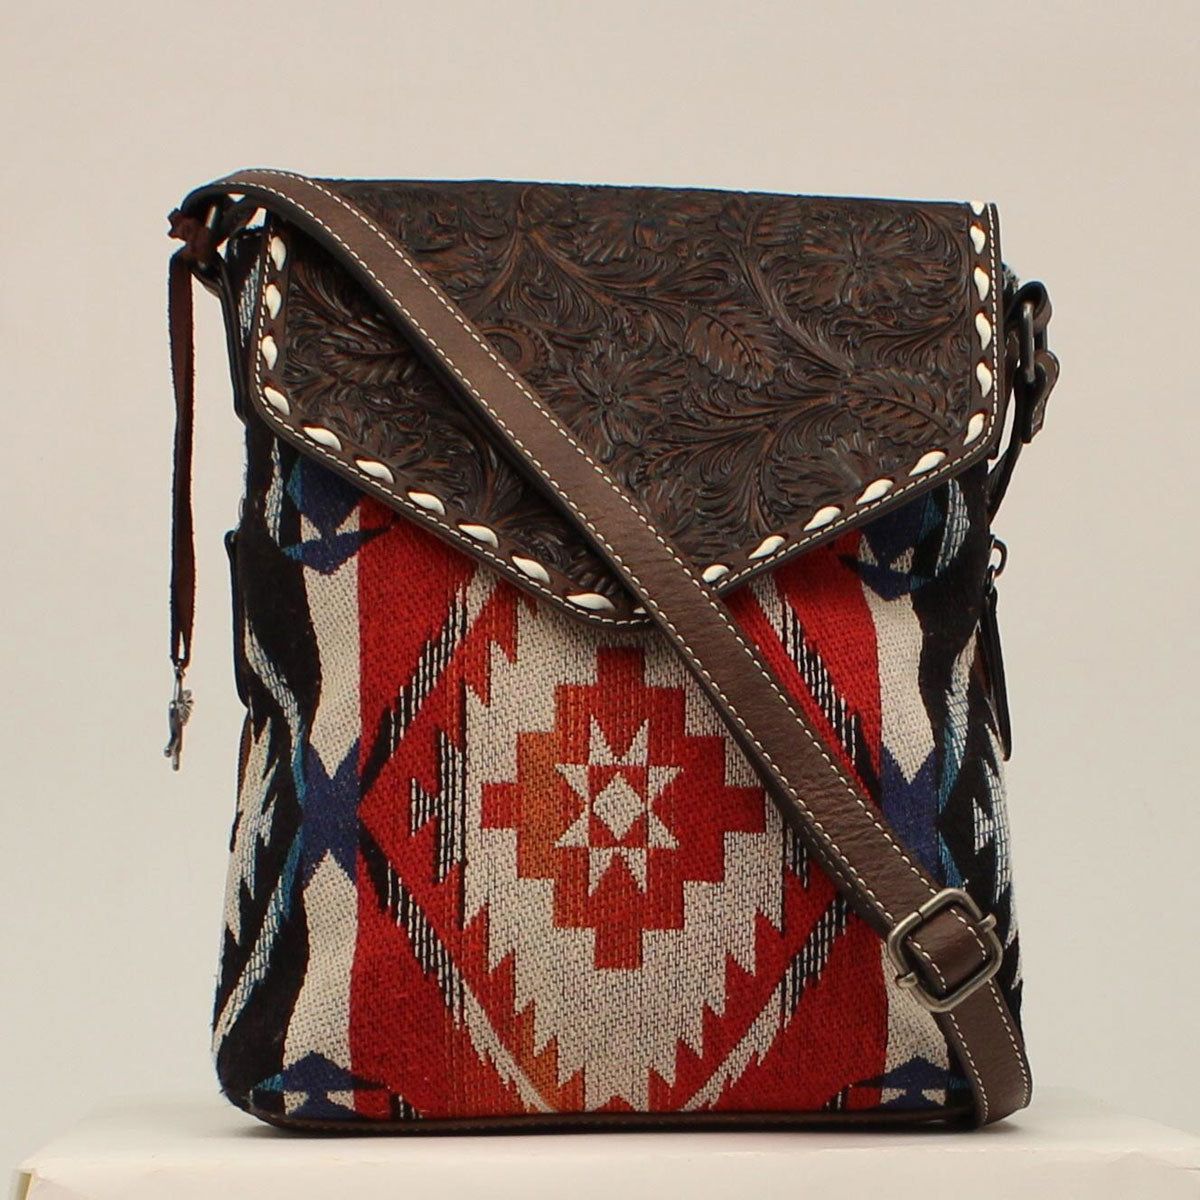 Concealed Carry Purse with Fringe - Cowboy Boot Purse - Crossbody Conceal Carry Purse